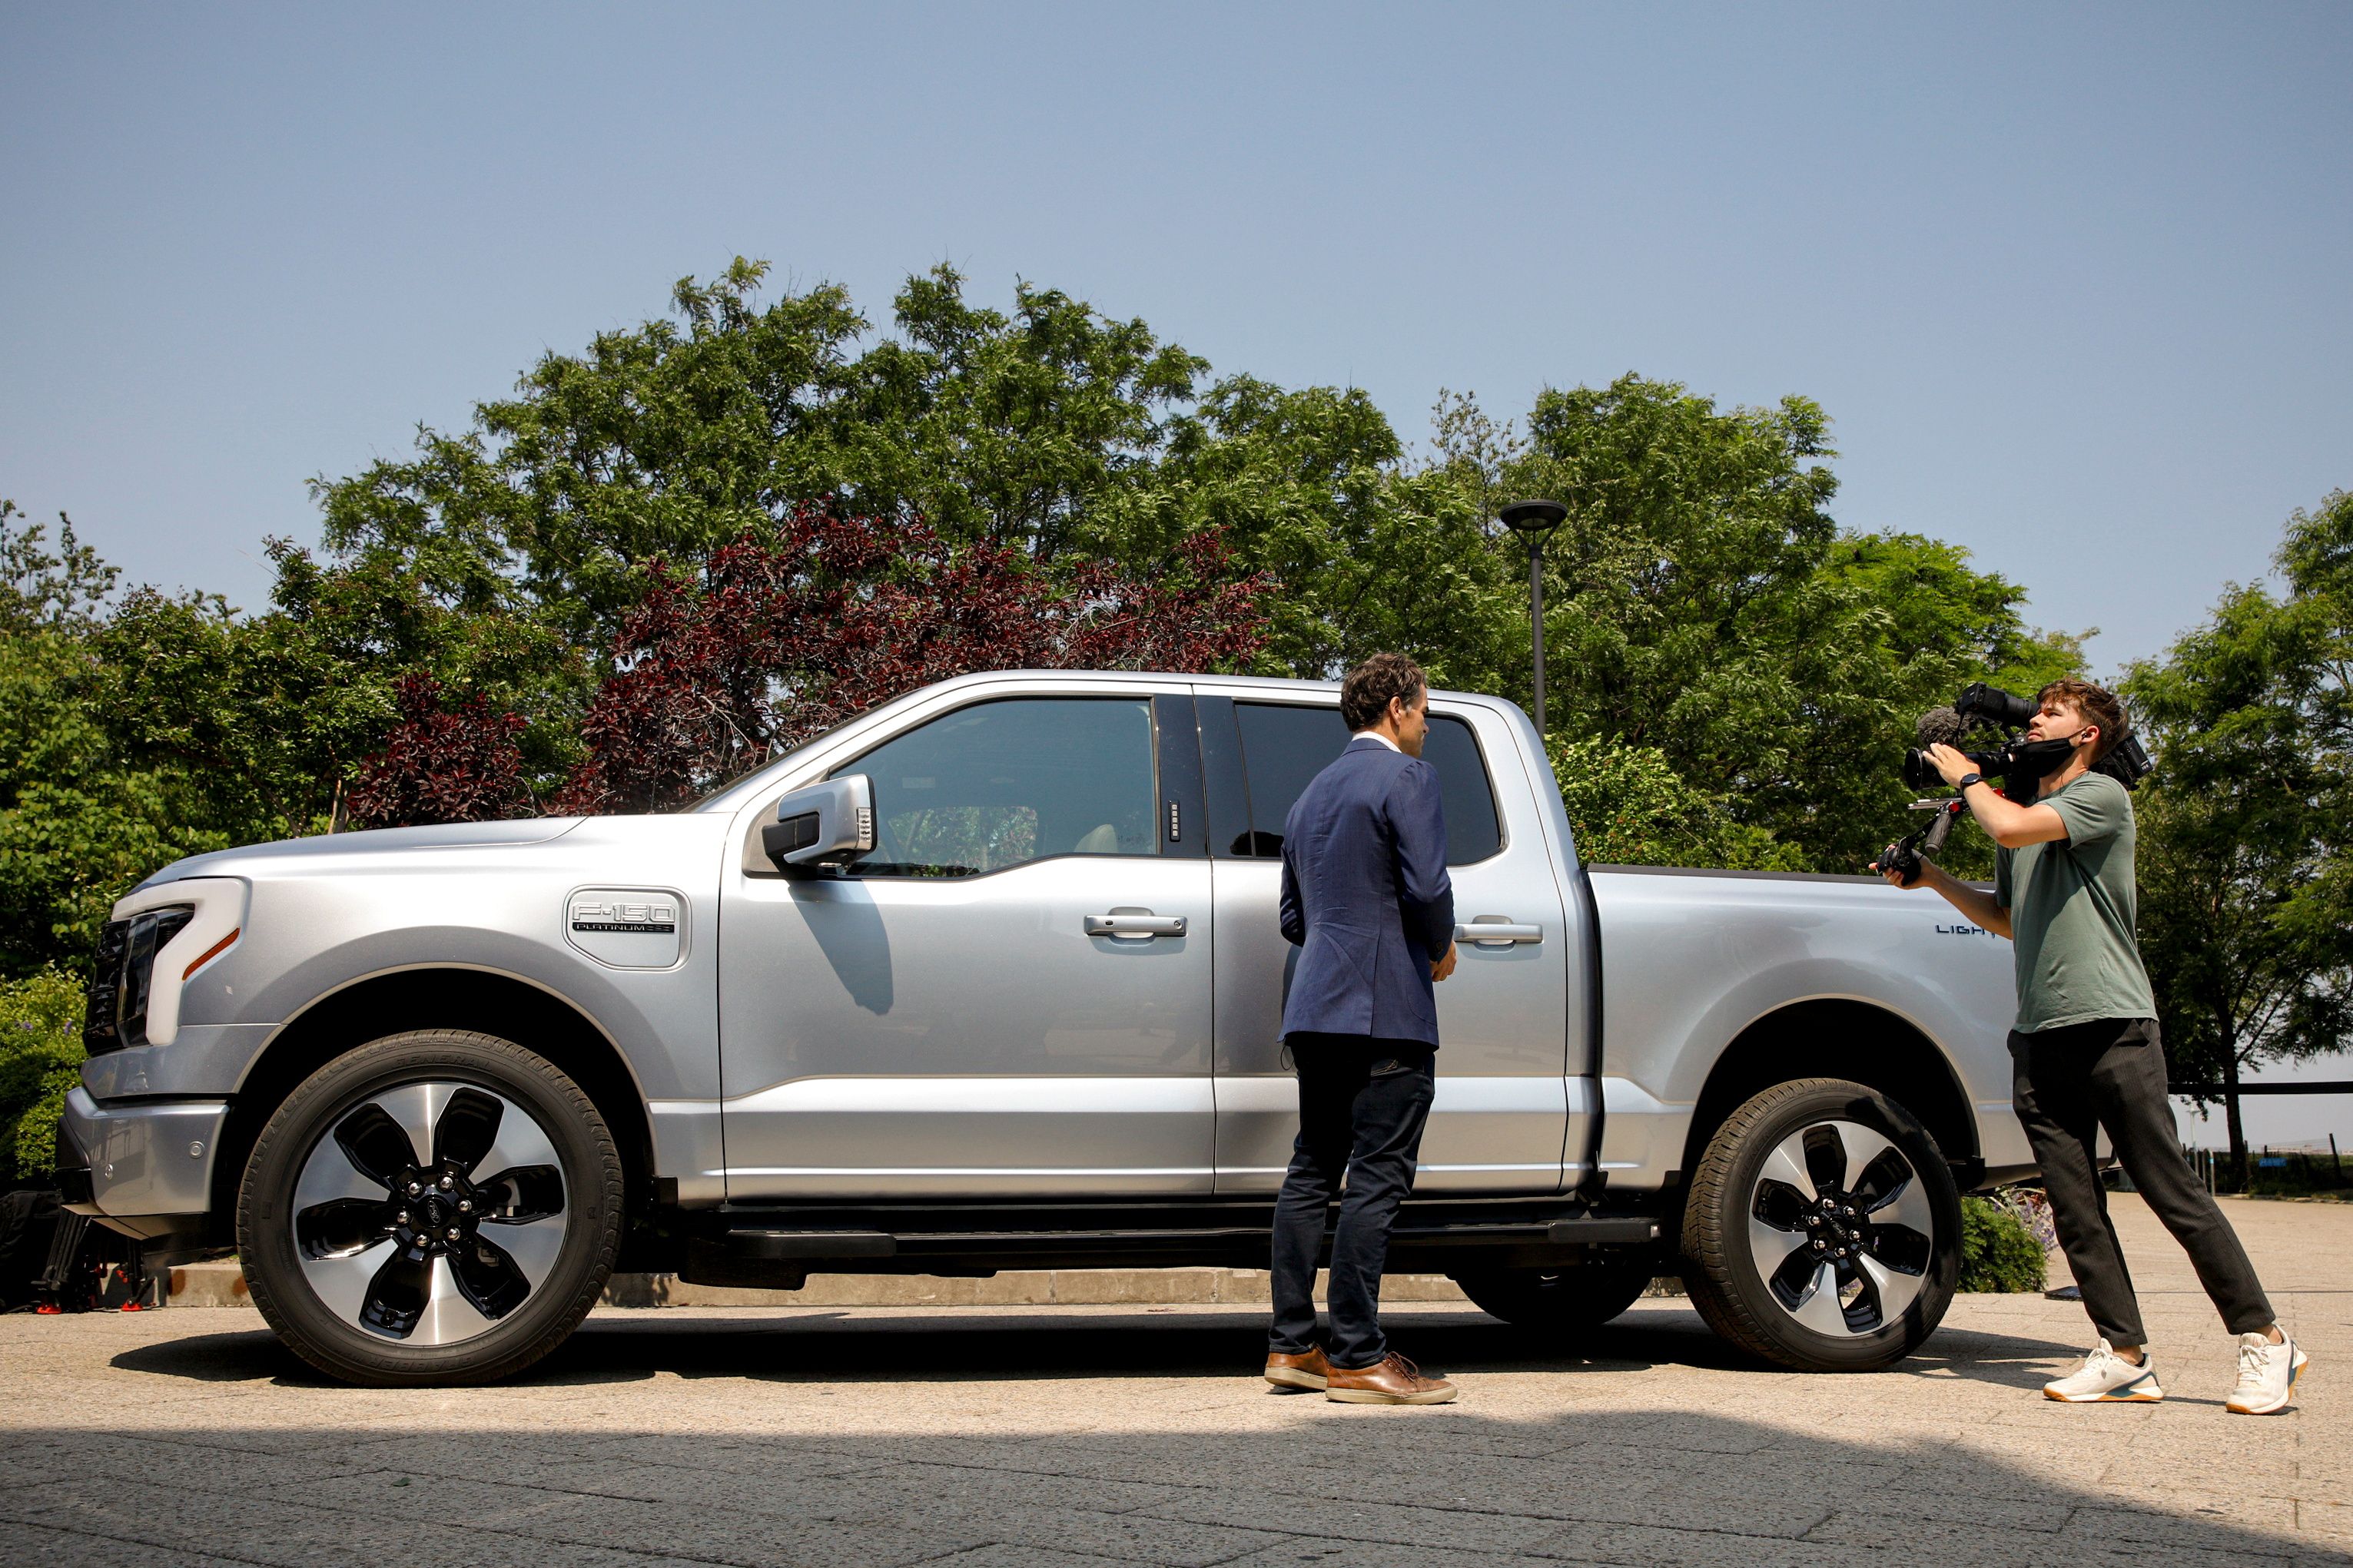 A news crew films the Ford F-150 Lightning pickup truck during a press event in New York City, U.S., May 26, 2021.  REUTERS/Brendan McDermid